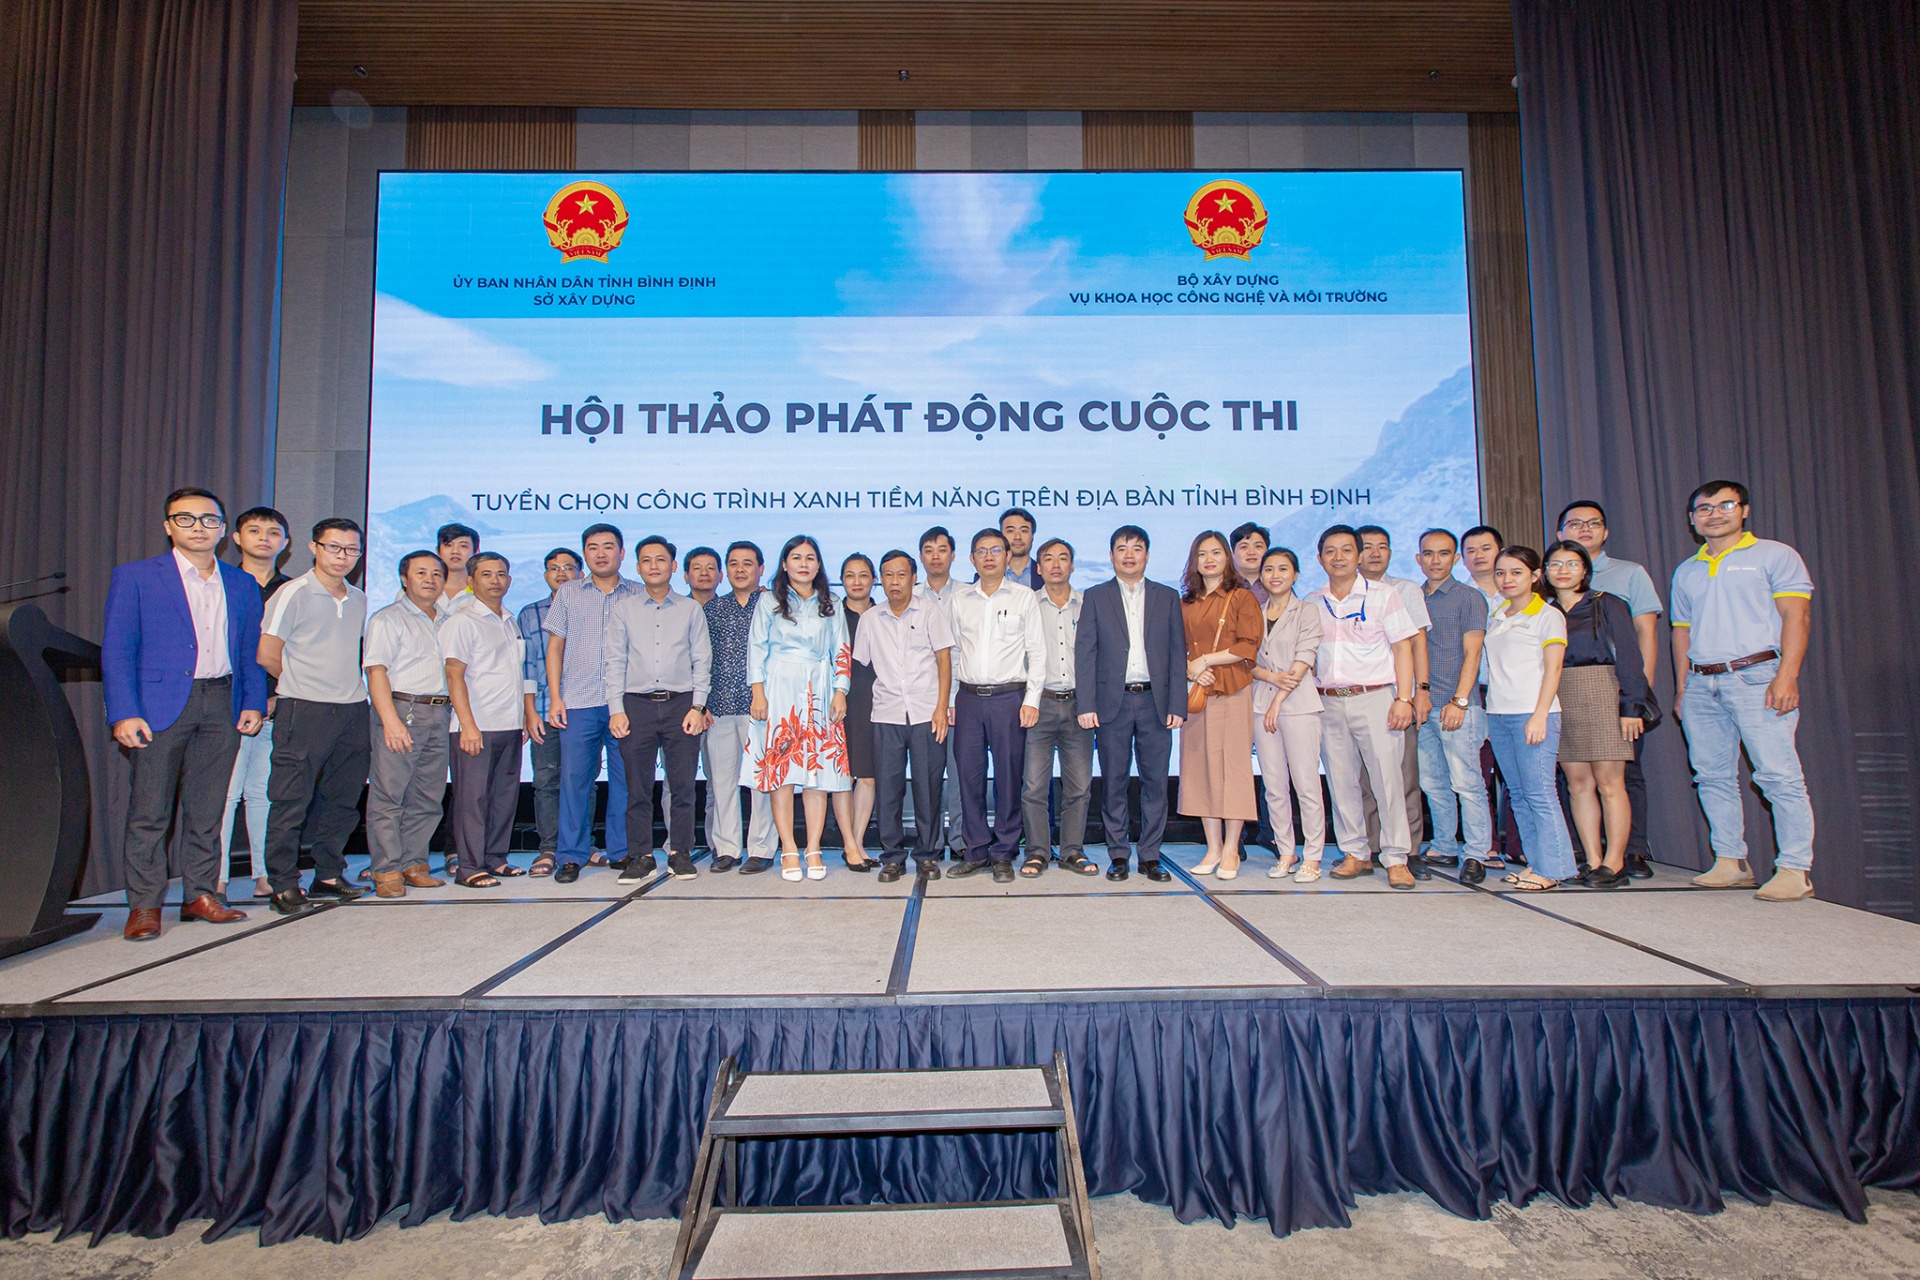 Competition to promote green buildings in Binh Dinh province